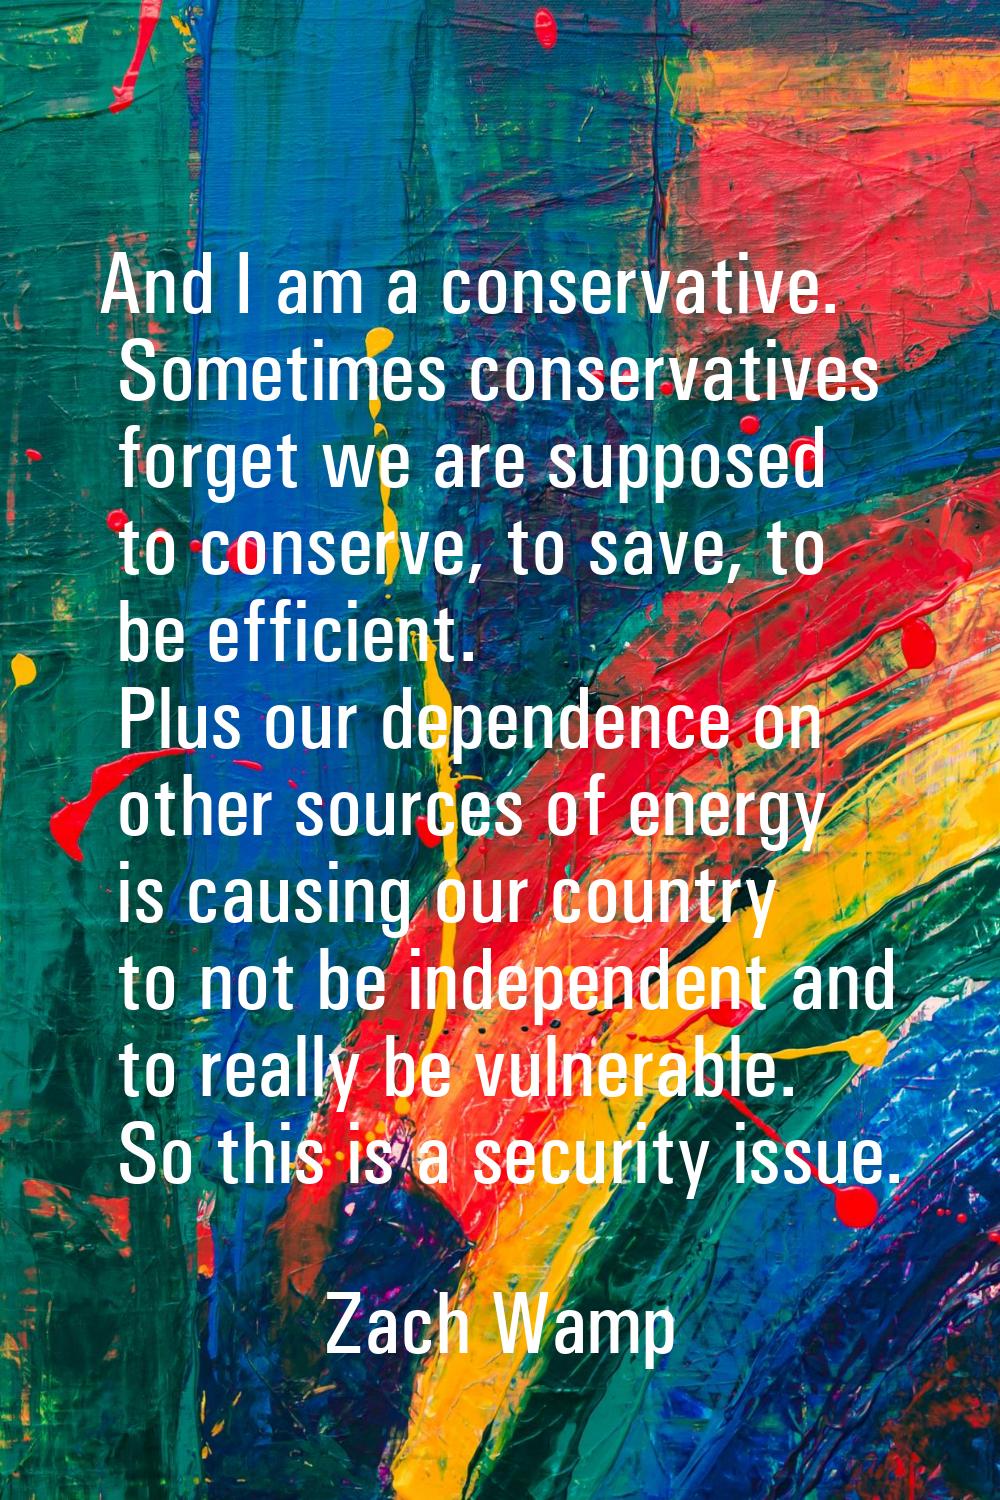 And I am a conservative. Sometimes conservatives forget we are supposed to conserve, to save, to be